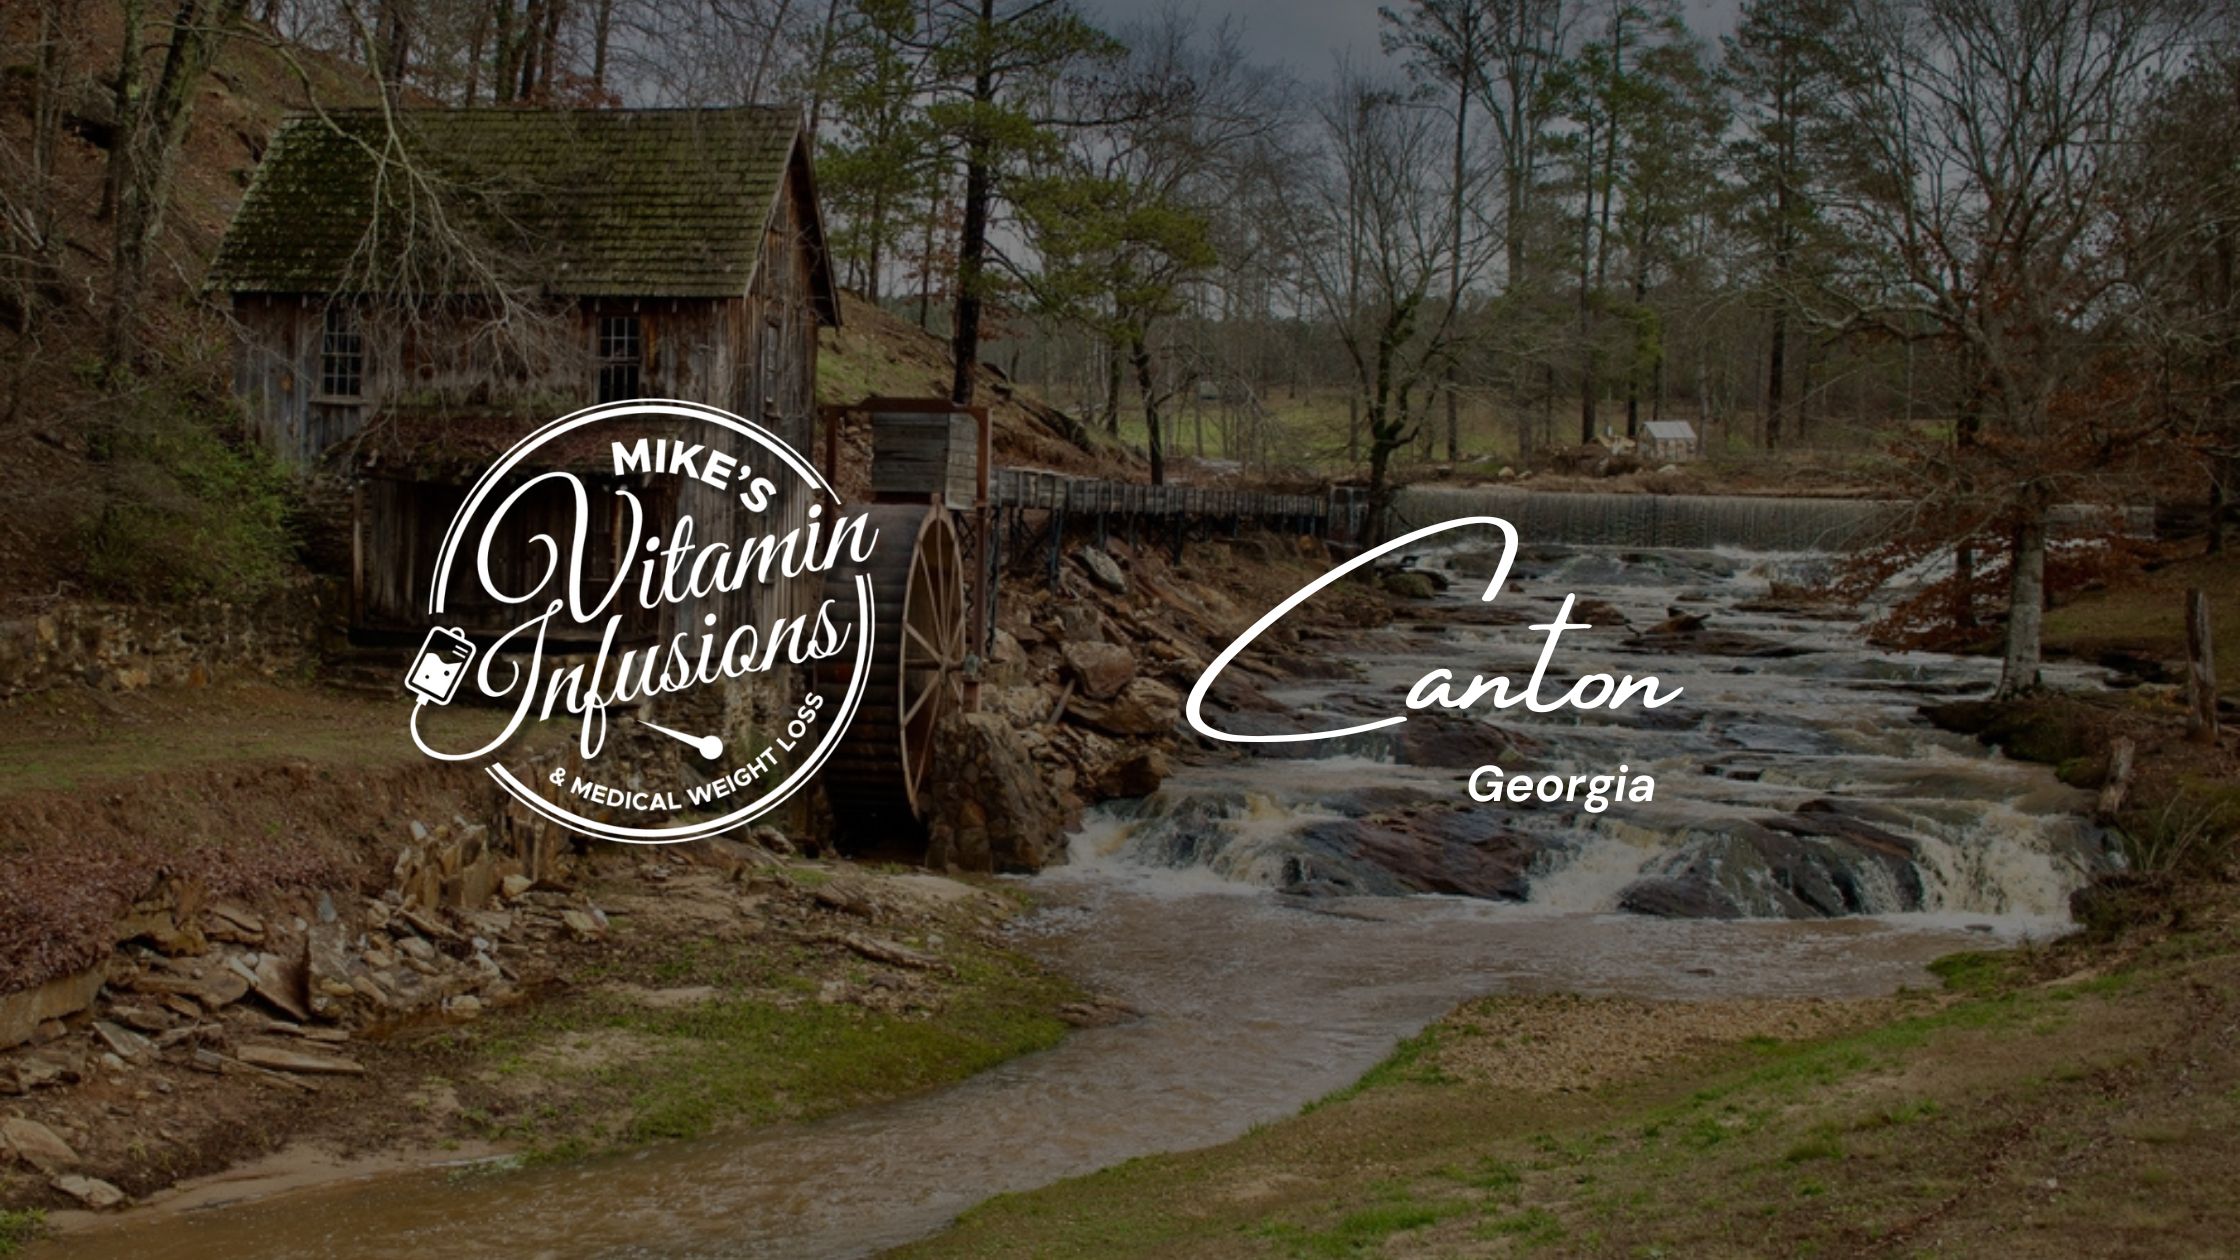 Image of a waterway in Canton Georgia with the mike's vitamin infusions logo